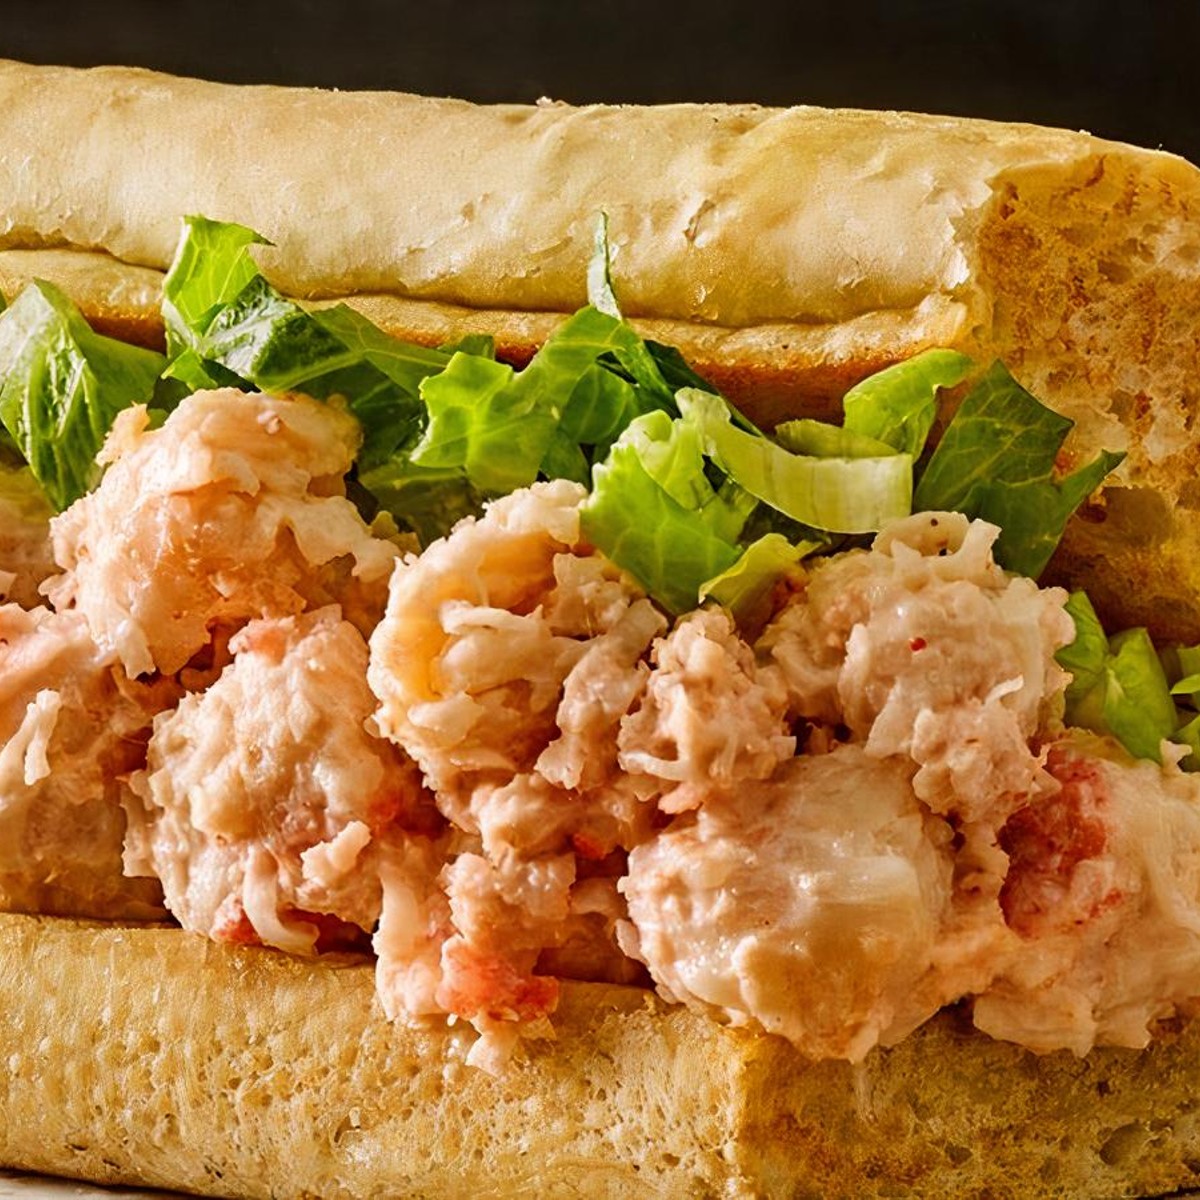 Quiznos Is Selling A Sub Filled With Old Bay Lobster Salad